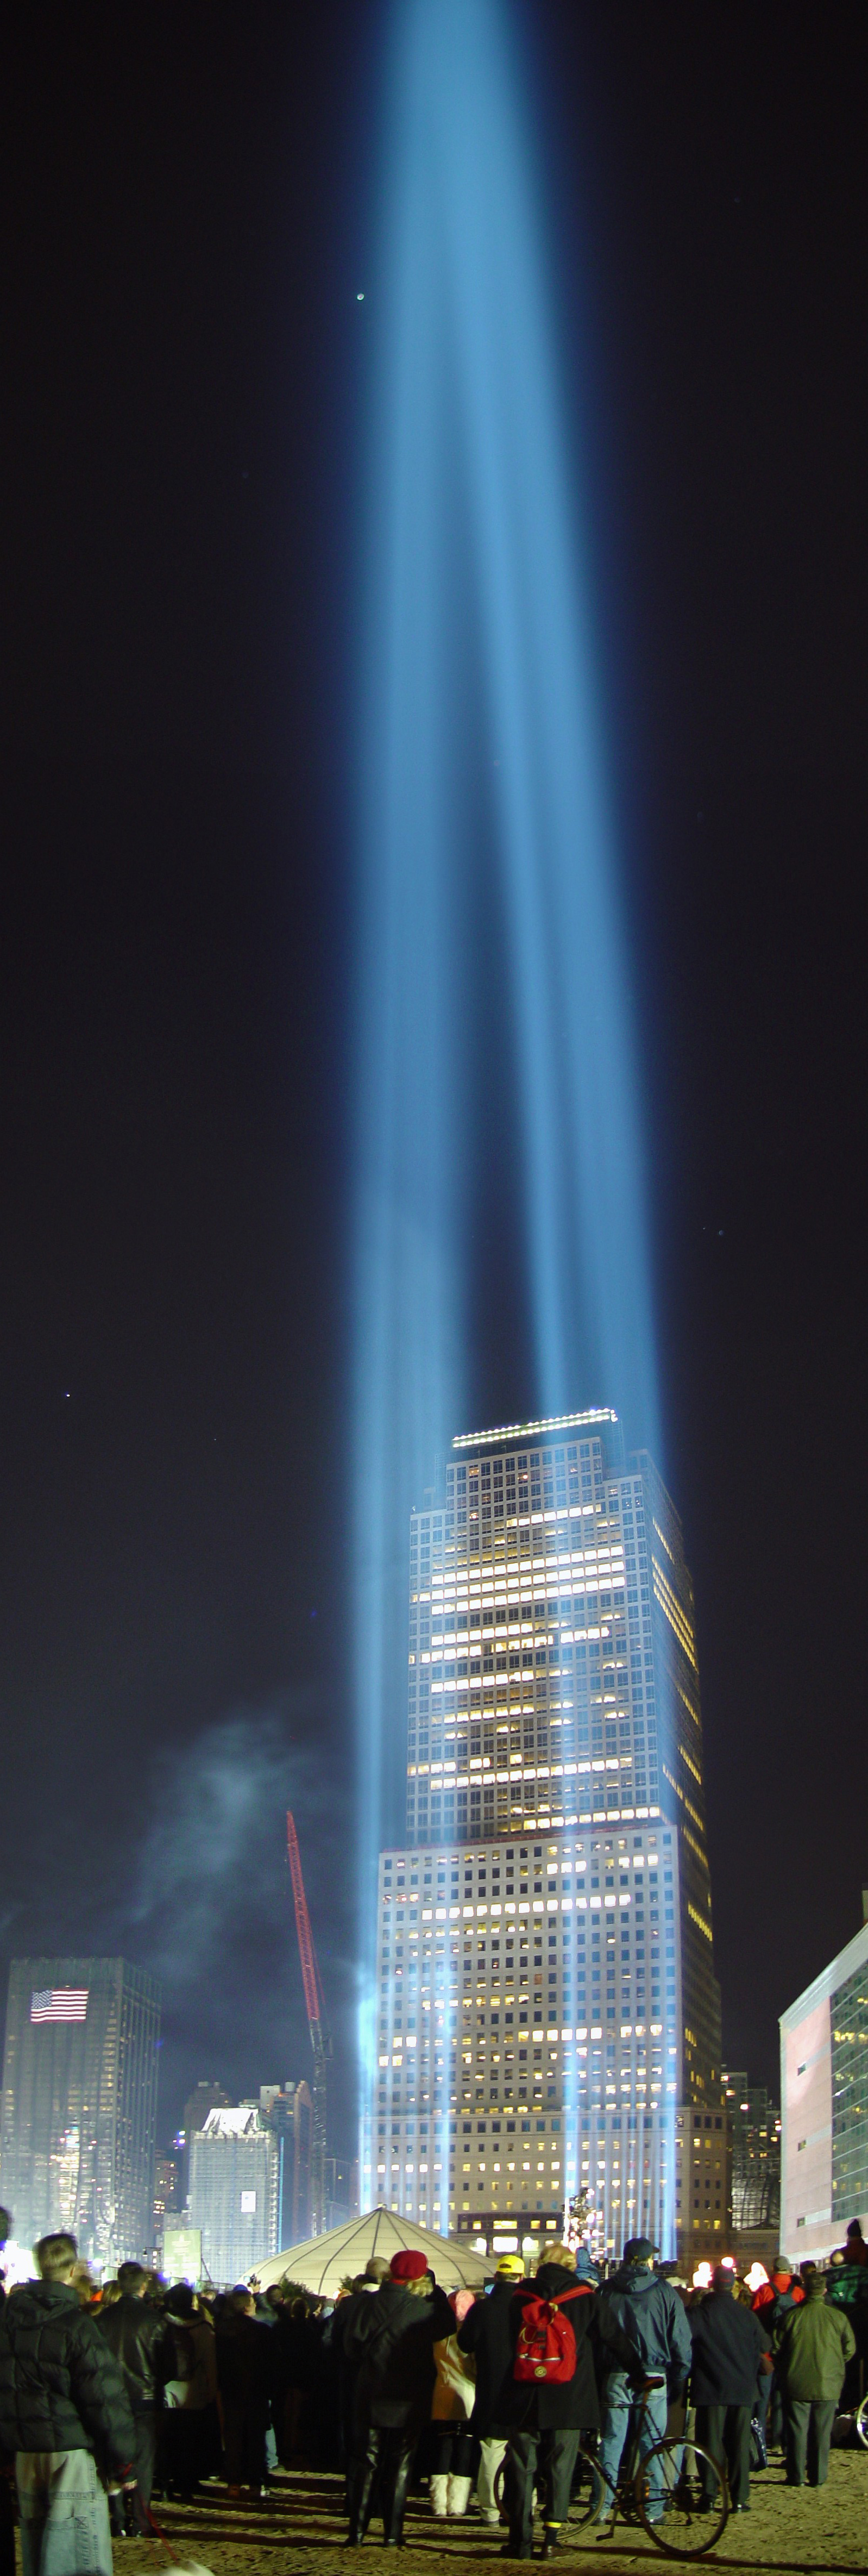 New York City: Tribute of lights in the night<BR><FONT size=1>by Omega Zero</font>